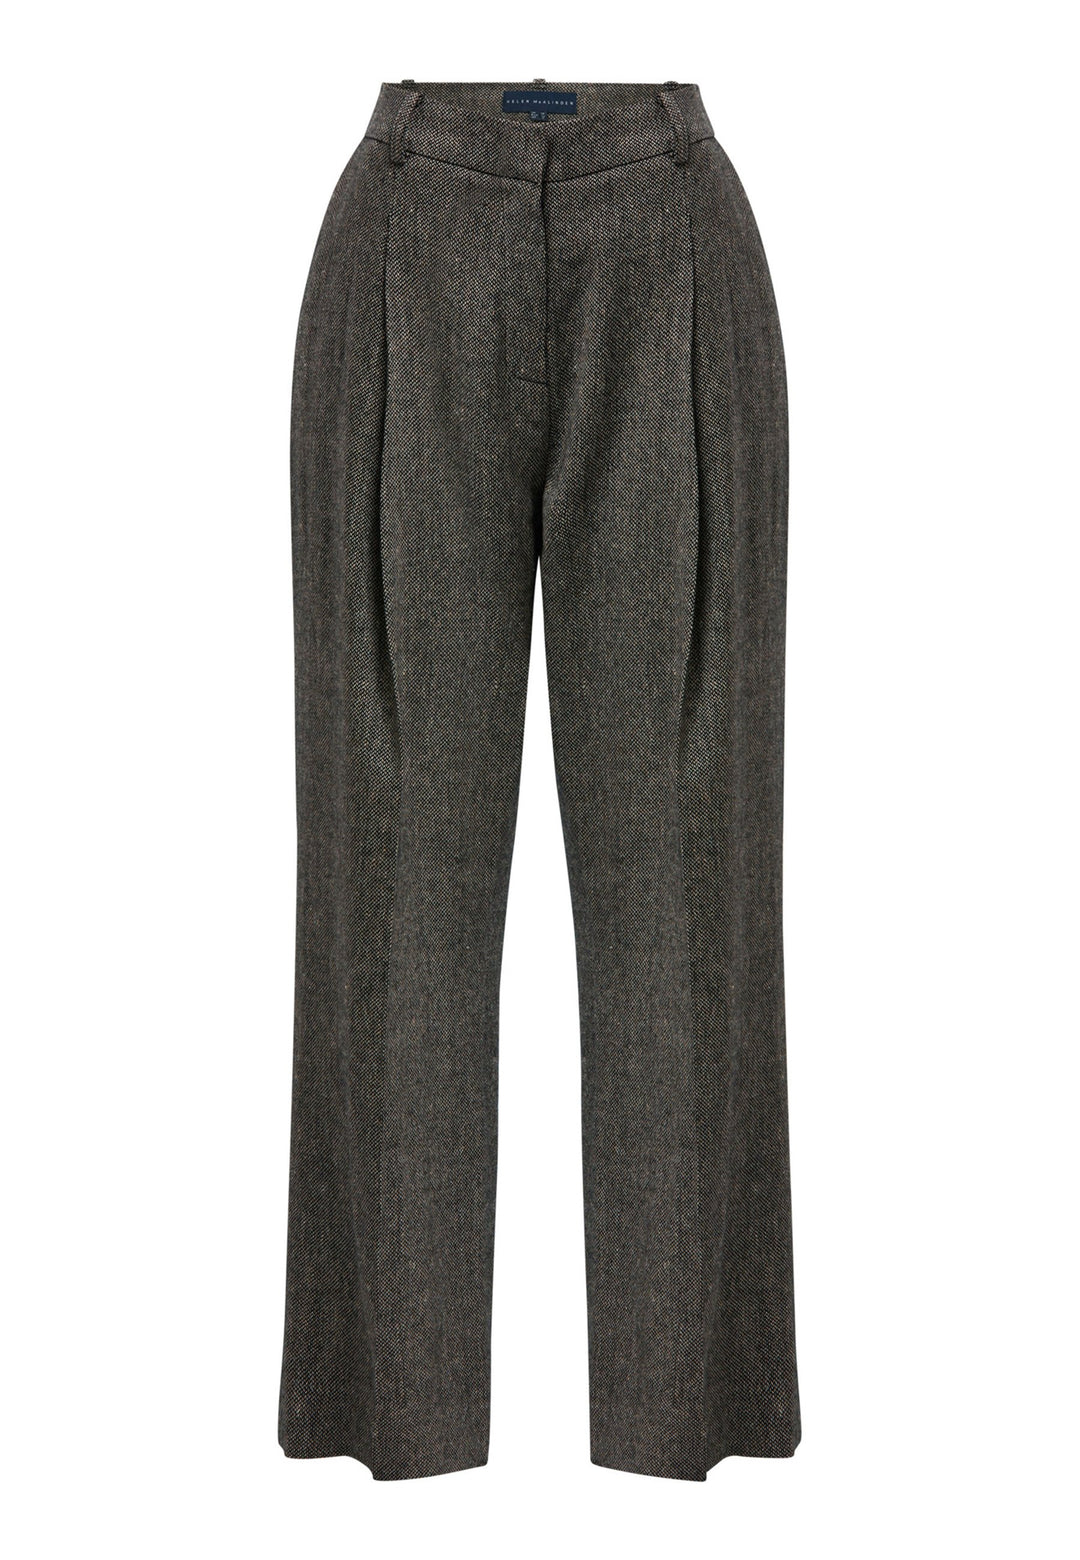 Introducing the Lyra Tweed Trousers, a stylish choice that adds flair to your wardrobe. Featuring a wide leg design with pleat front detailing, these trousers exude sophistication. Crafted from a high-quality black and cream speckled tweed fabric, they embody timeless elegance. The Lyra Tweed Trousers offer versatility, allowing you to dress them up or down for various occasions. 